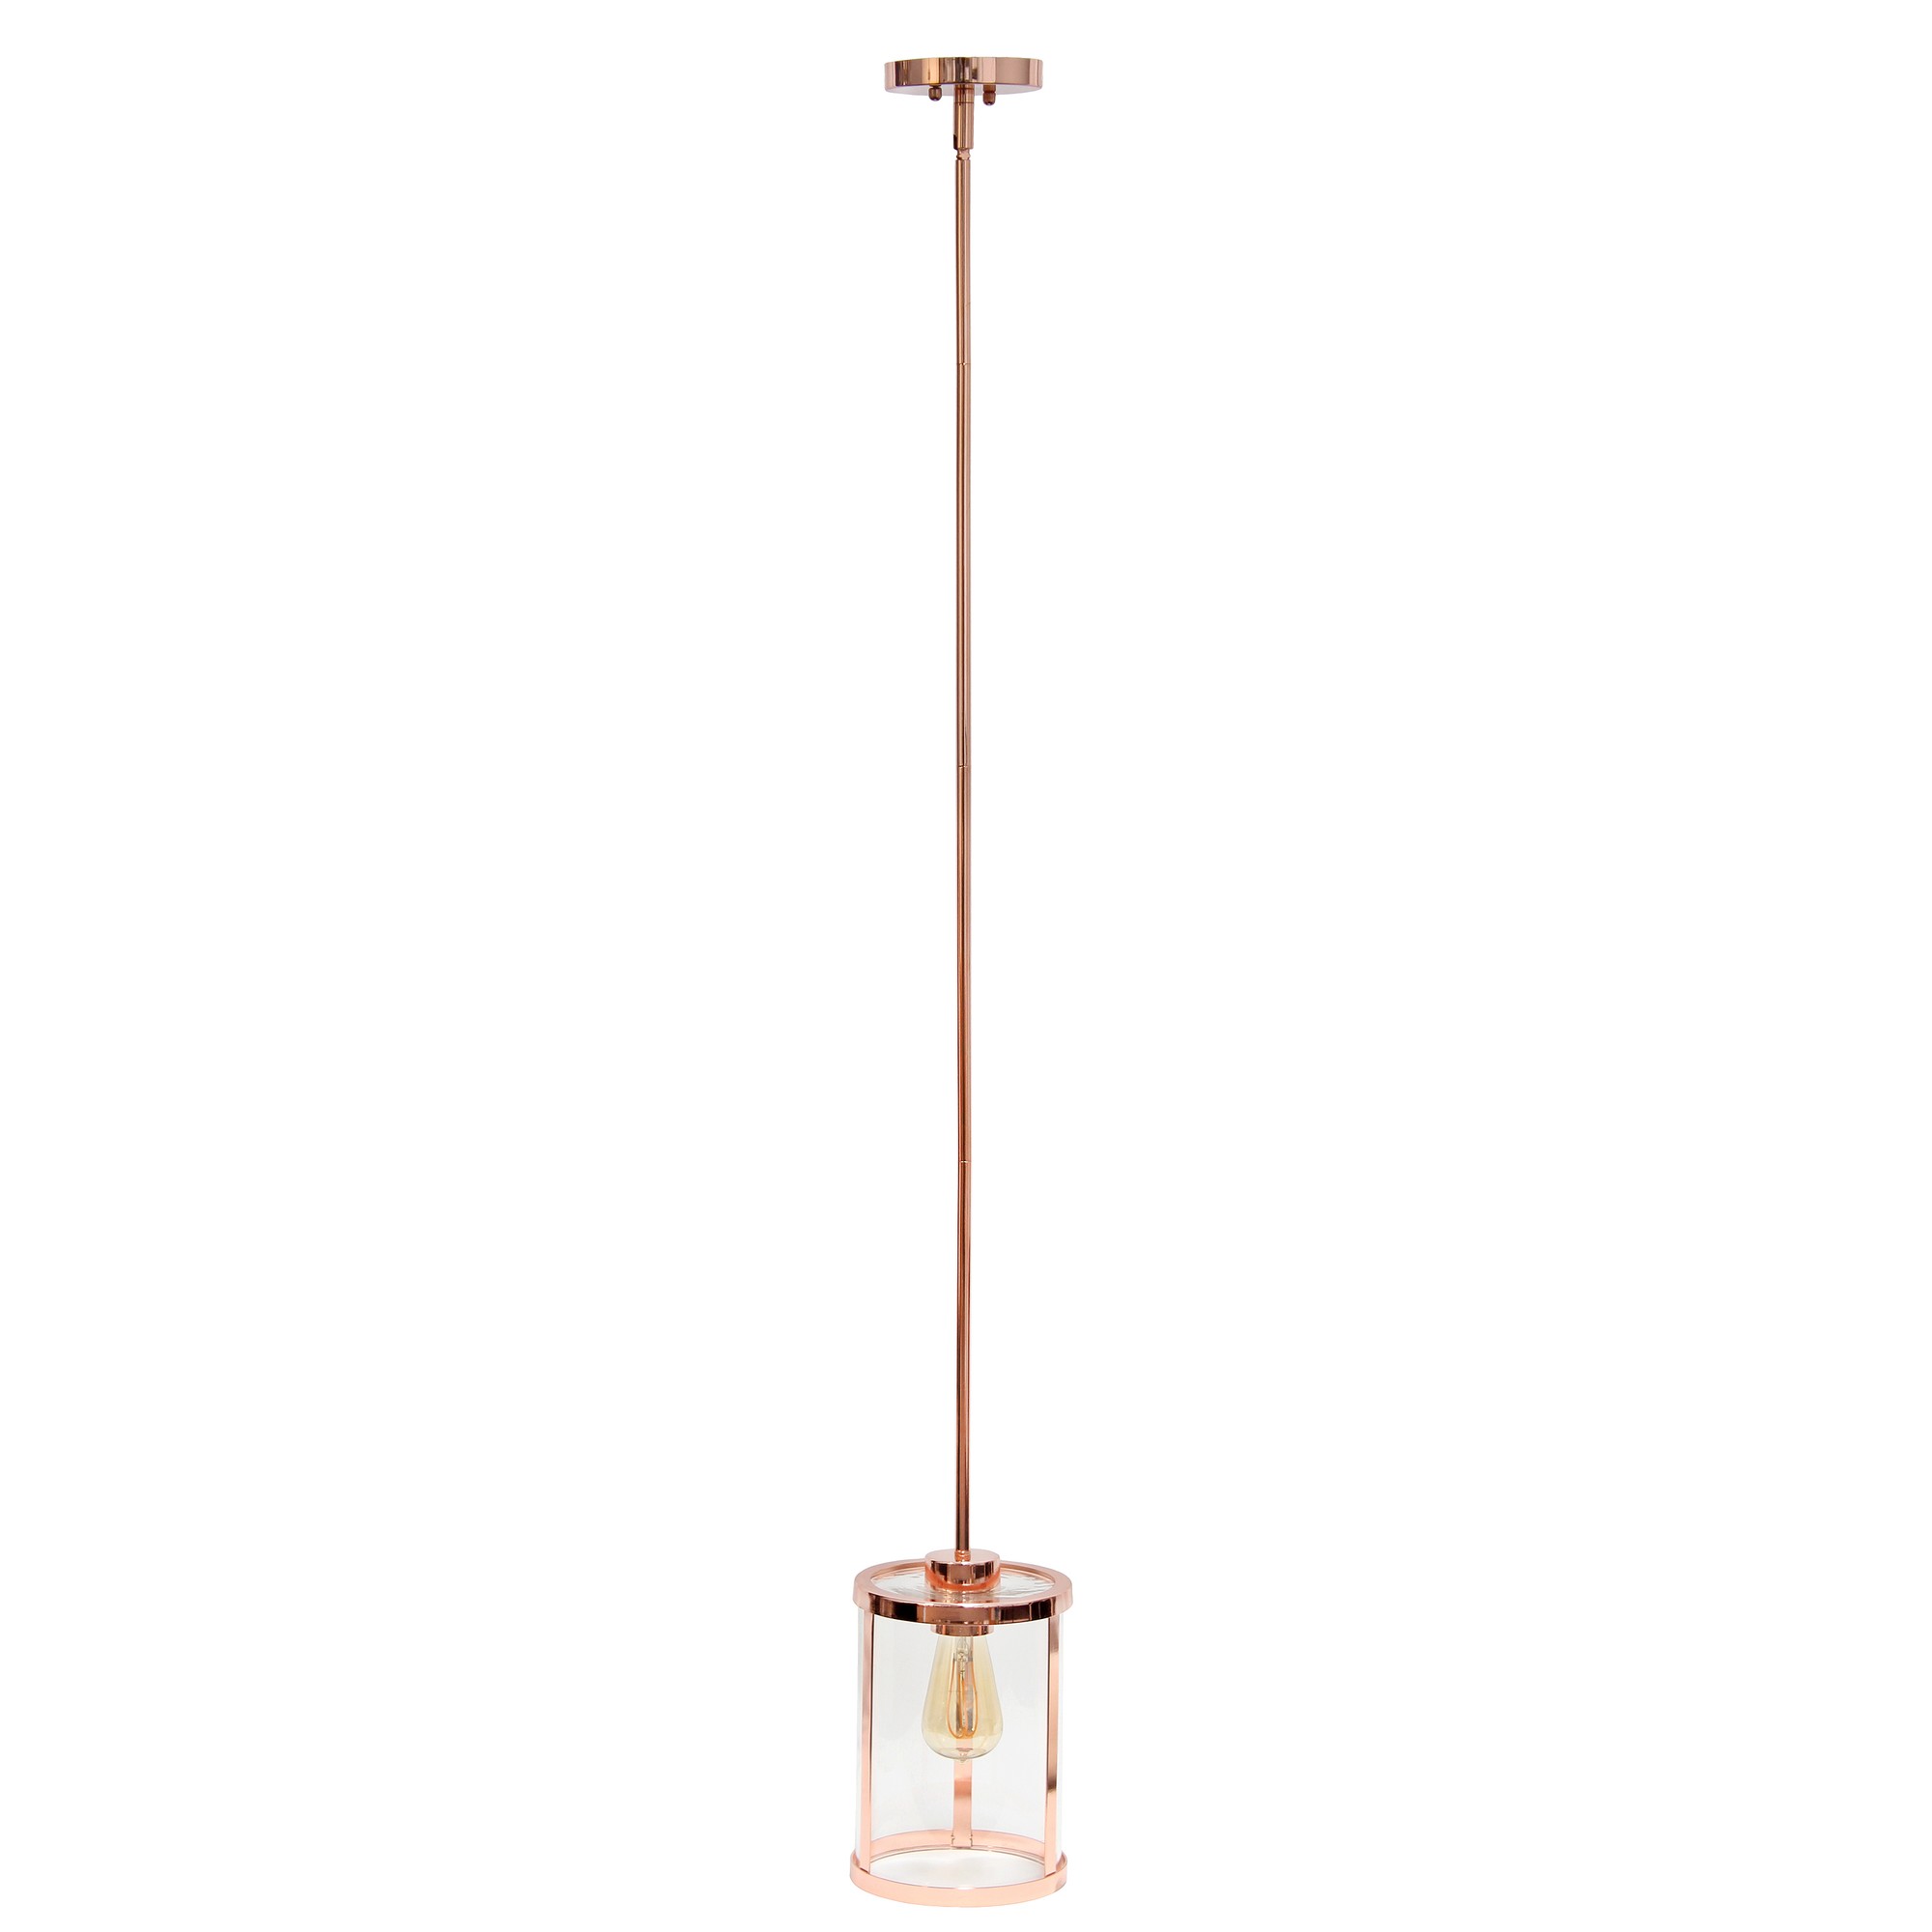 Lalia Home 1-Light 9.25" Modern Adjustable Hanging Cylindrical Clear Glass Pendant Fixture with Metal Accents, Rose Gold